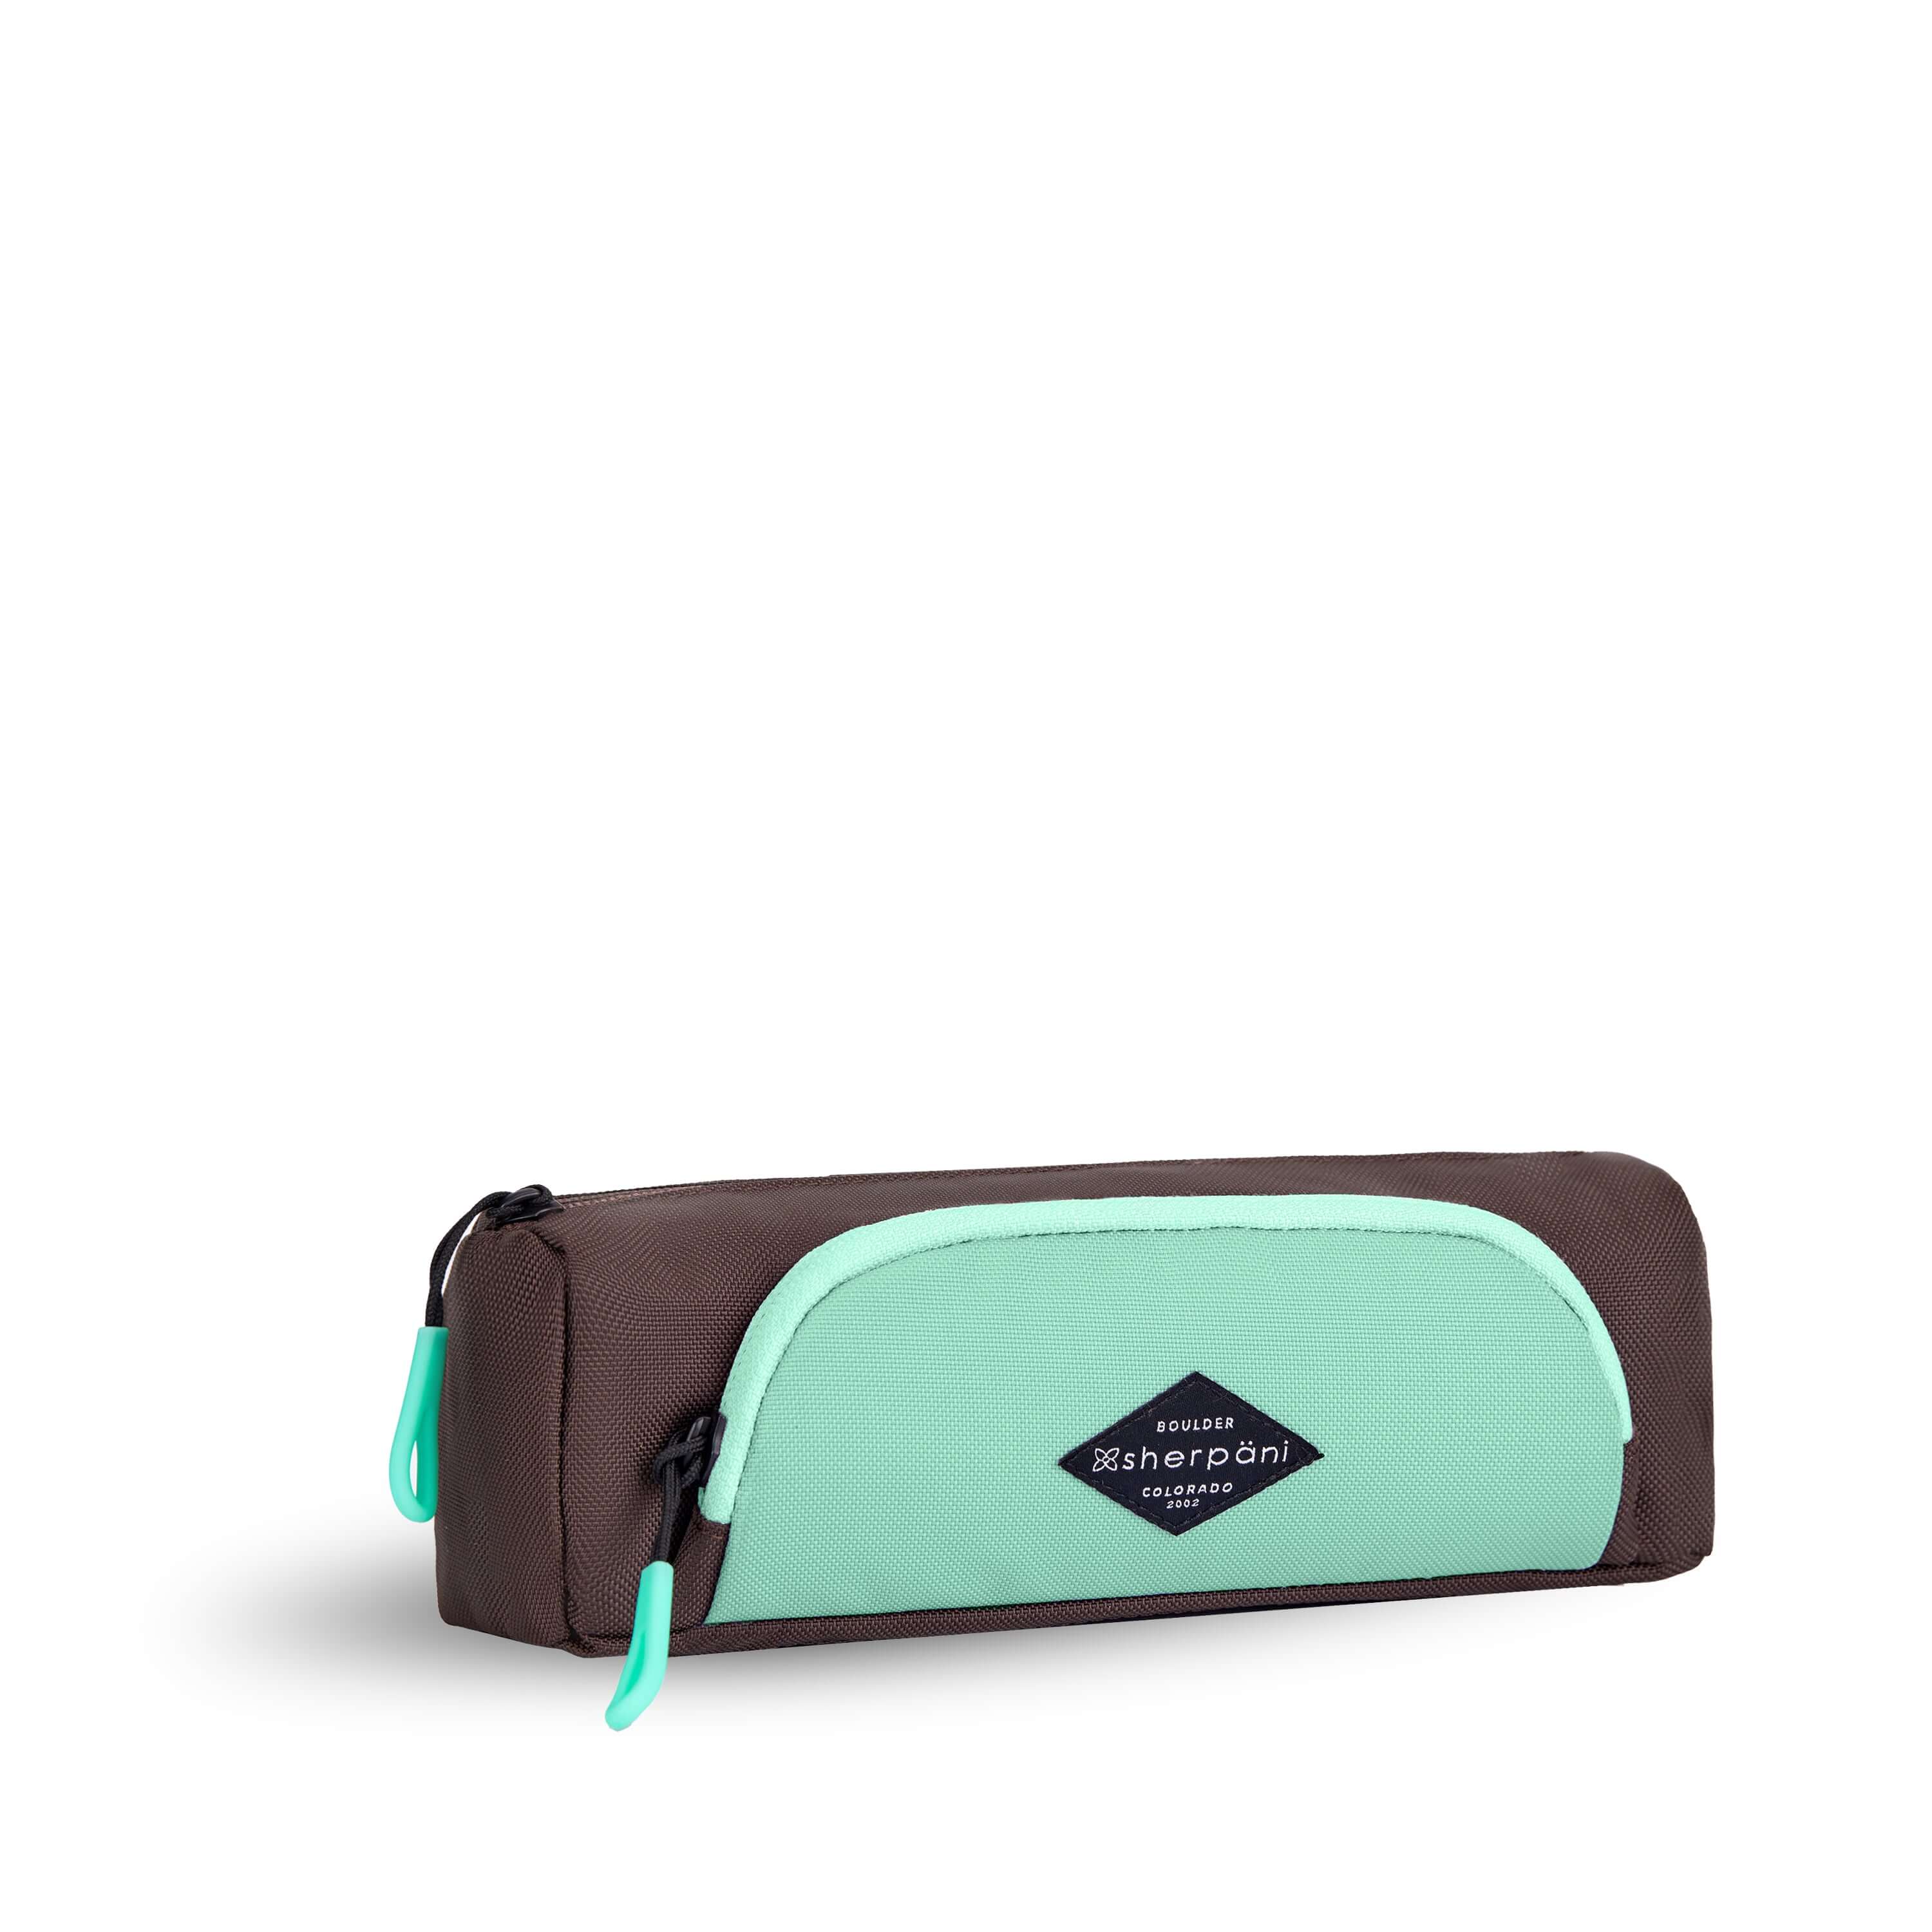 Angled front view of Sherpani travel accessory, the Poet in Seagreen. The pouch is two-toned in light green and brown. There is an external zipper pocket on the front. Easy-pull zippers are accented in light green. #color_seagreen